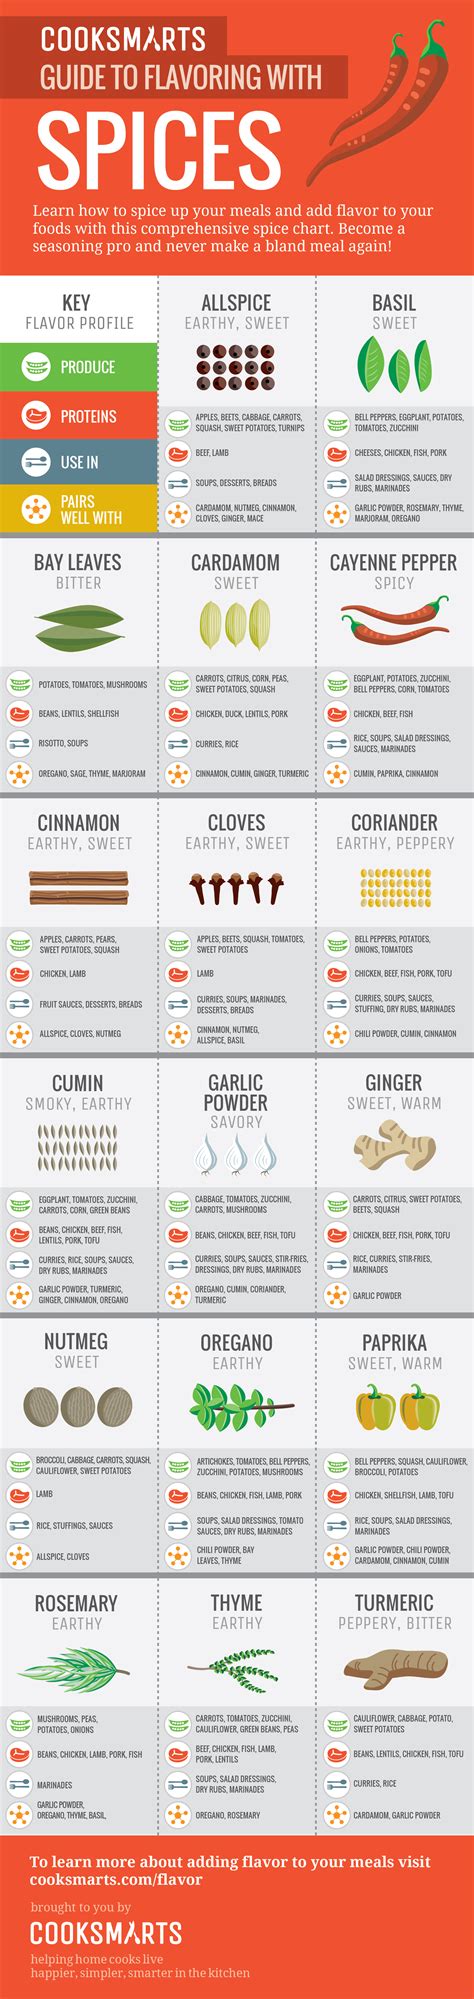 Infographic For Flavoring With Spices